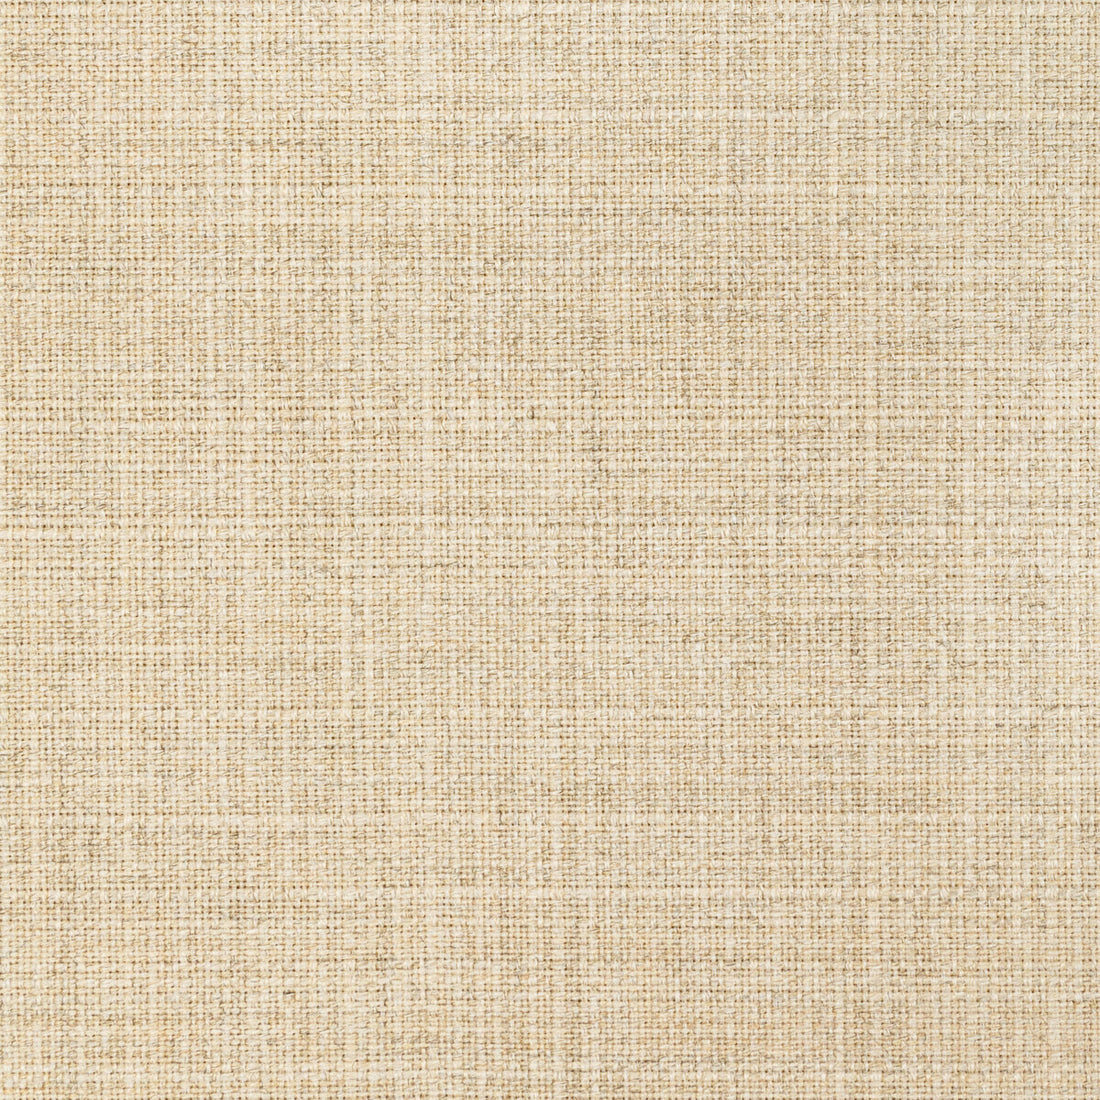 Kravet Basics fabric in 36821-16 color - pattern 36821.16.0 - by Kravet Basics in the Indoor / Outdoor collection